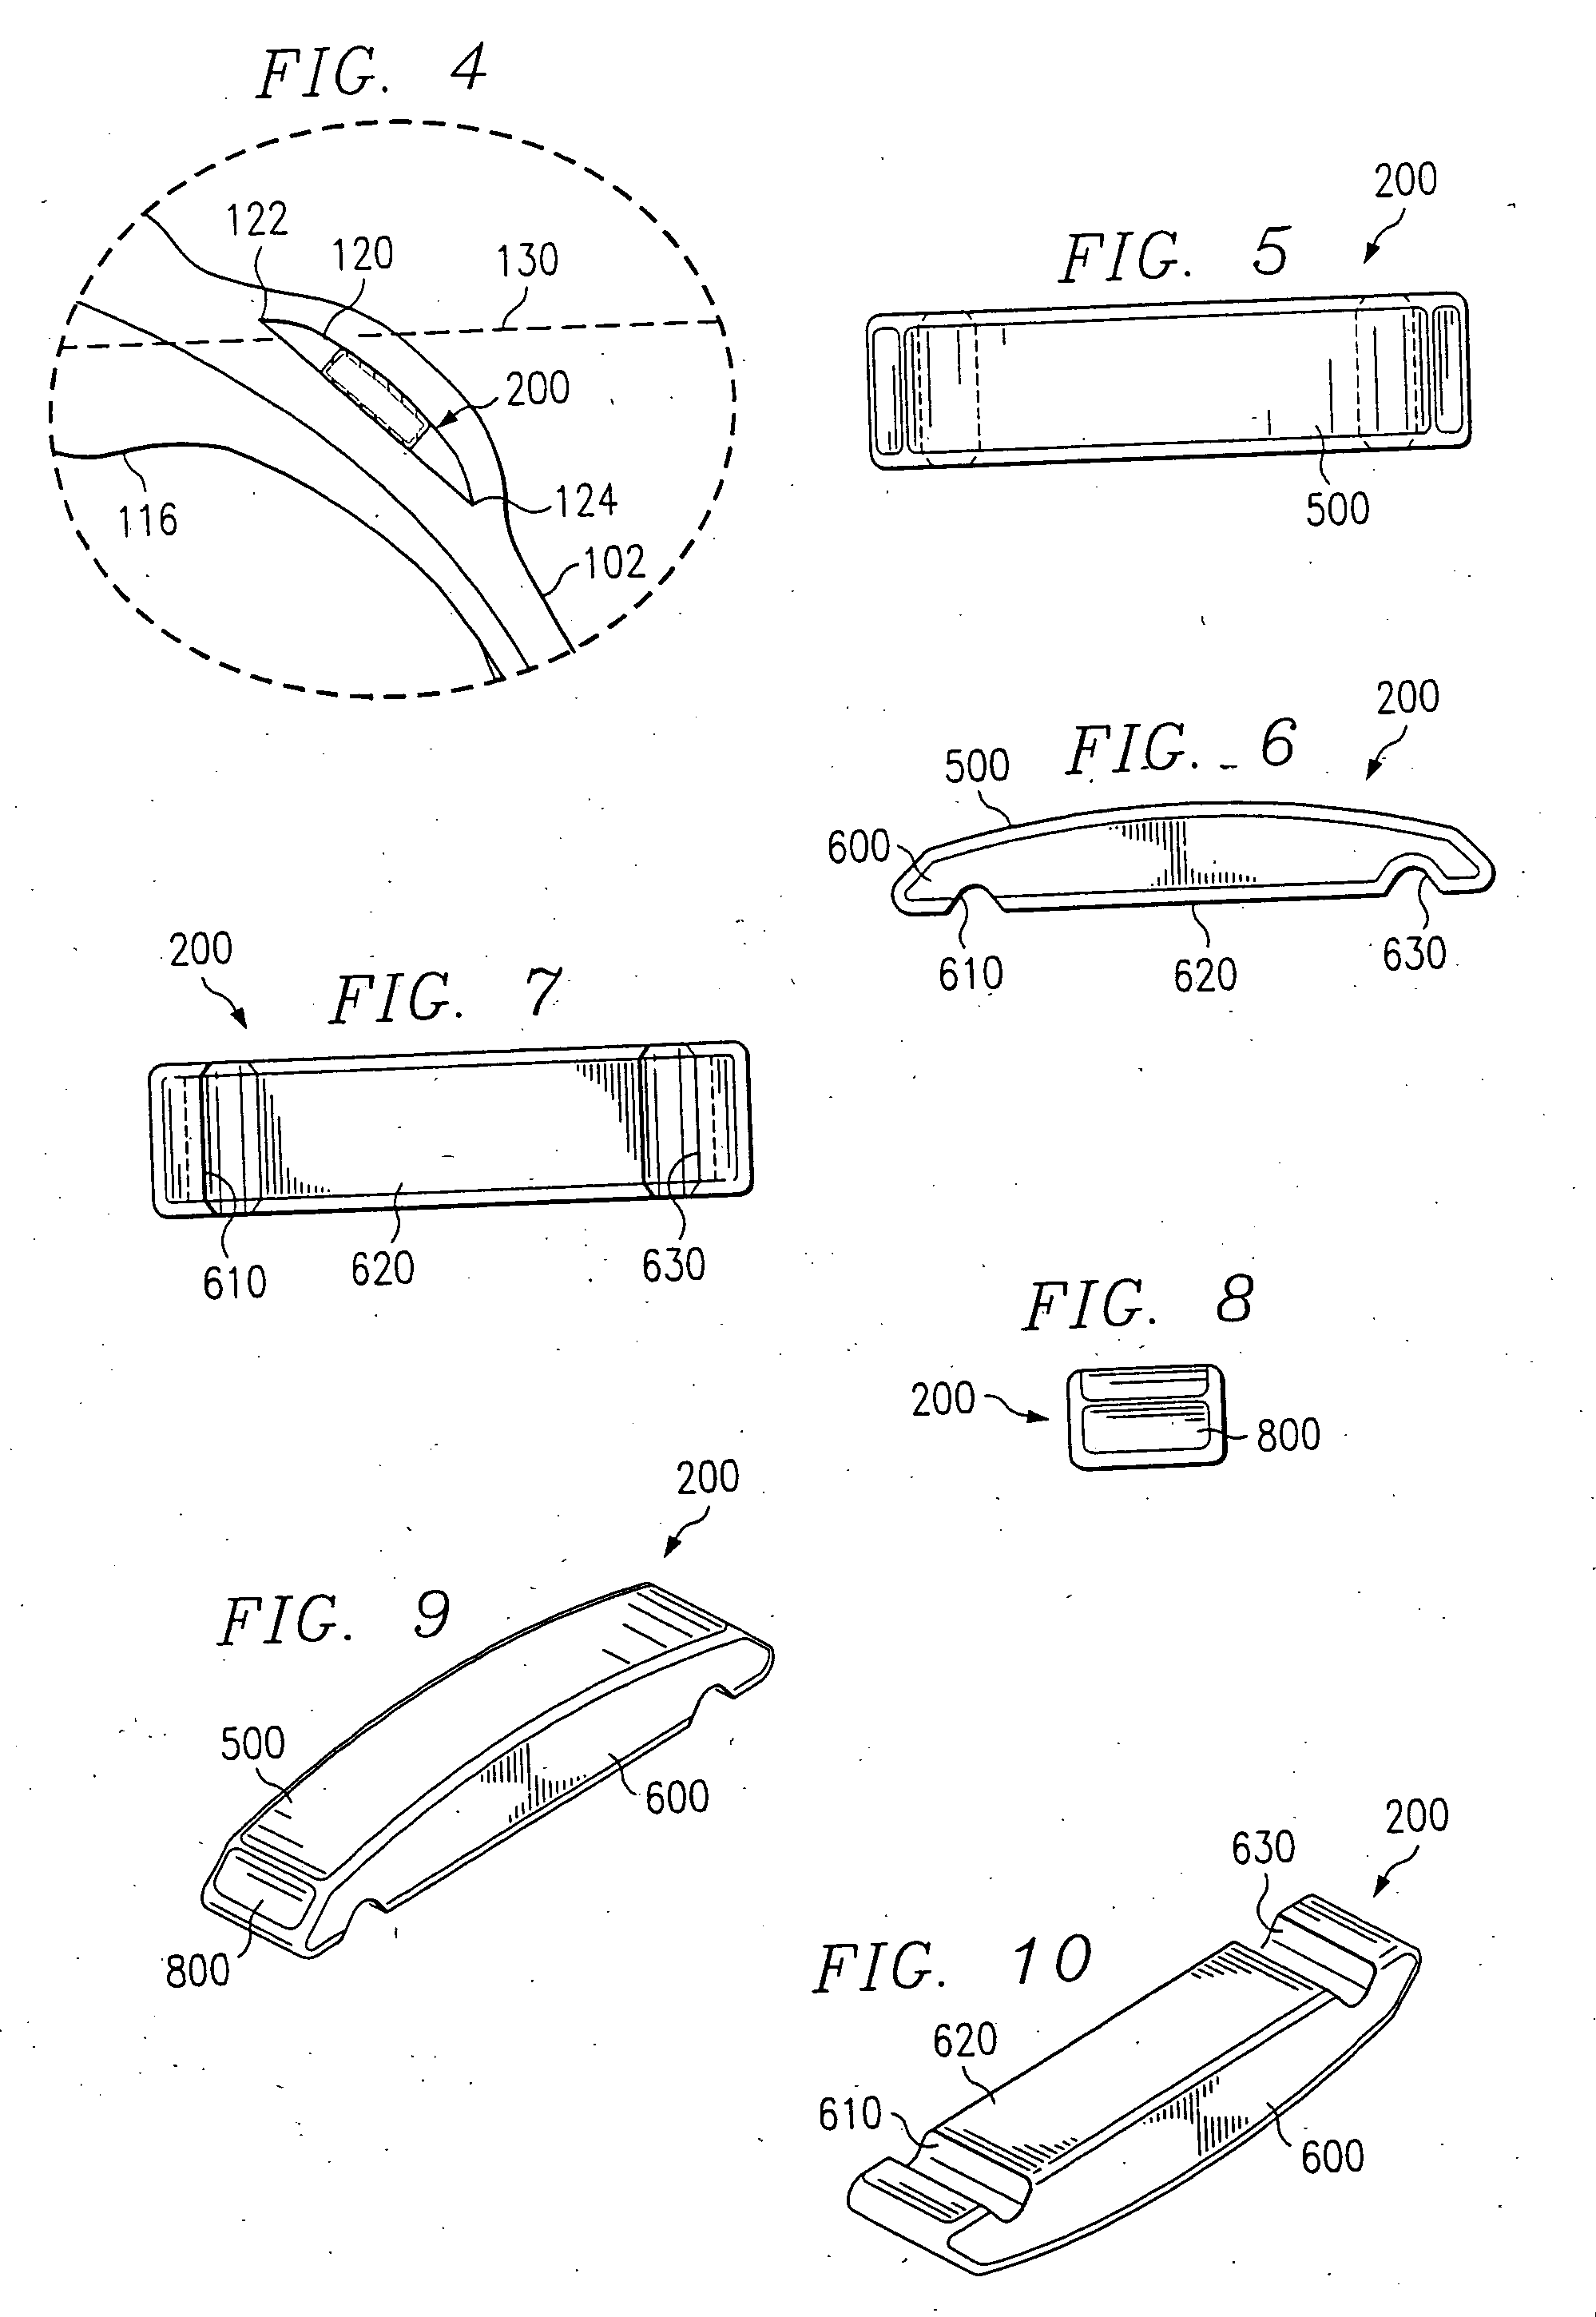 Surgical blade for use with a surgical tool for making incisions for scleral eye implants